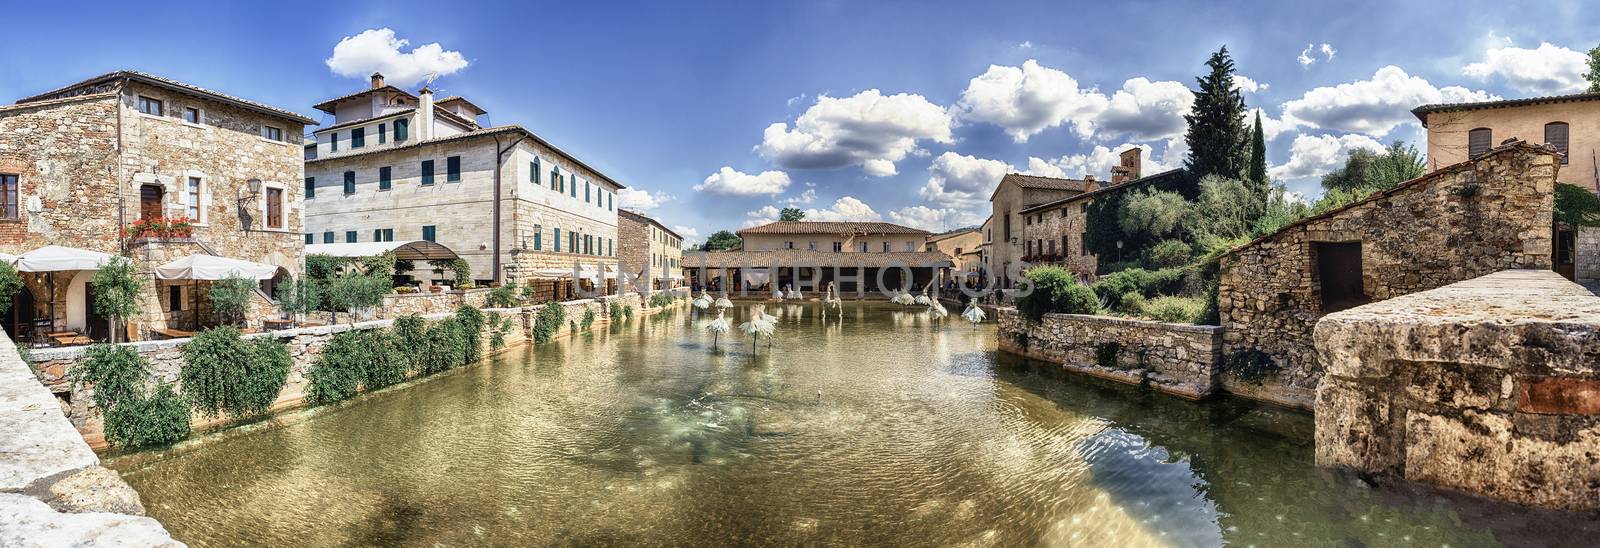 Panoramic view of the iconic medieval thermal baths, major landmark and sightseeing in the town of Bagno Vignoni, province of Siena, Tuscany, Italy